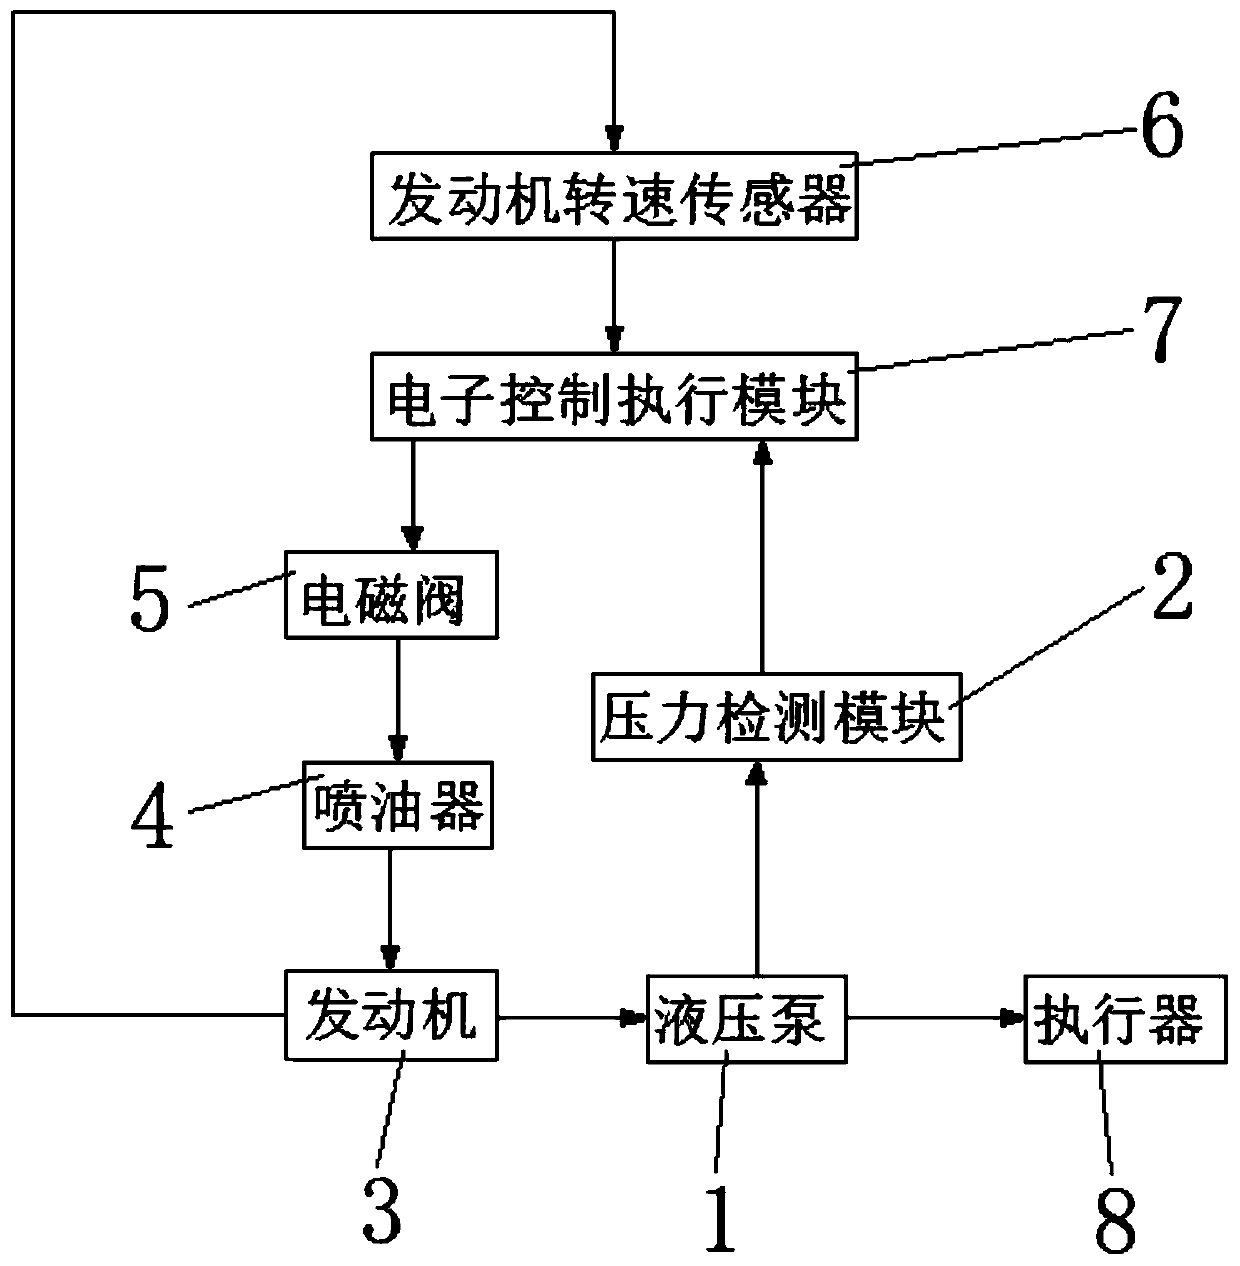 Control method for engineering machinery hydraulic system